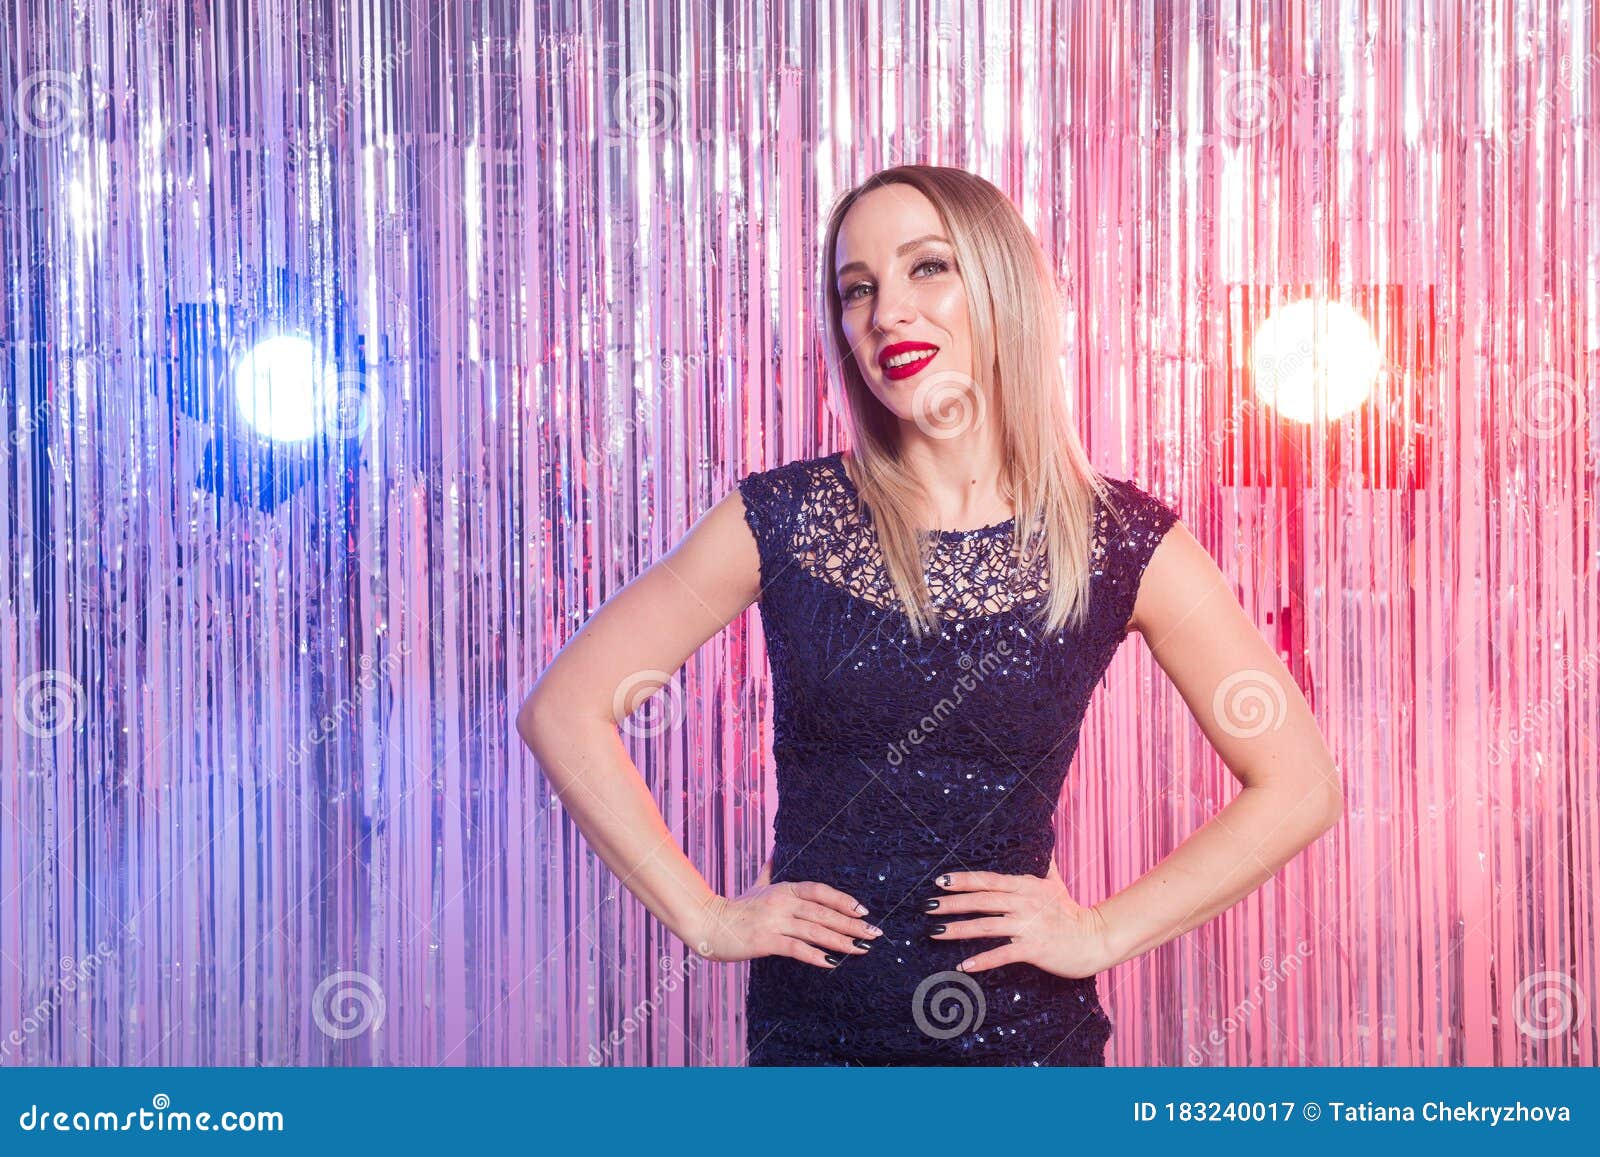 Beautiful Blonde Woman In The Disco Club Party Holidays And Celebration Concept Stock Image 